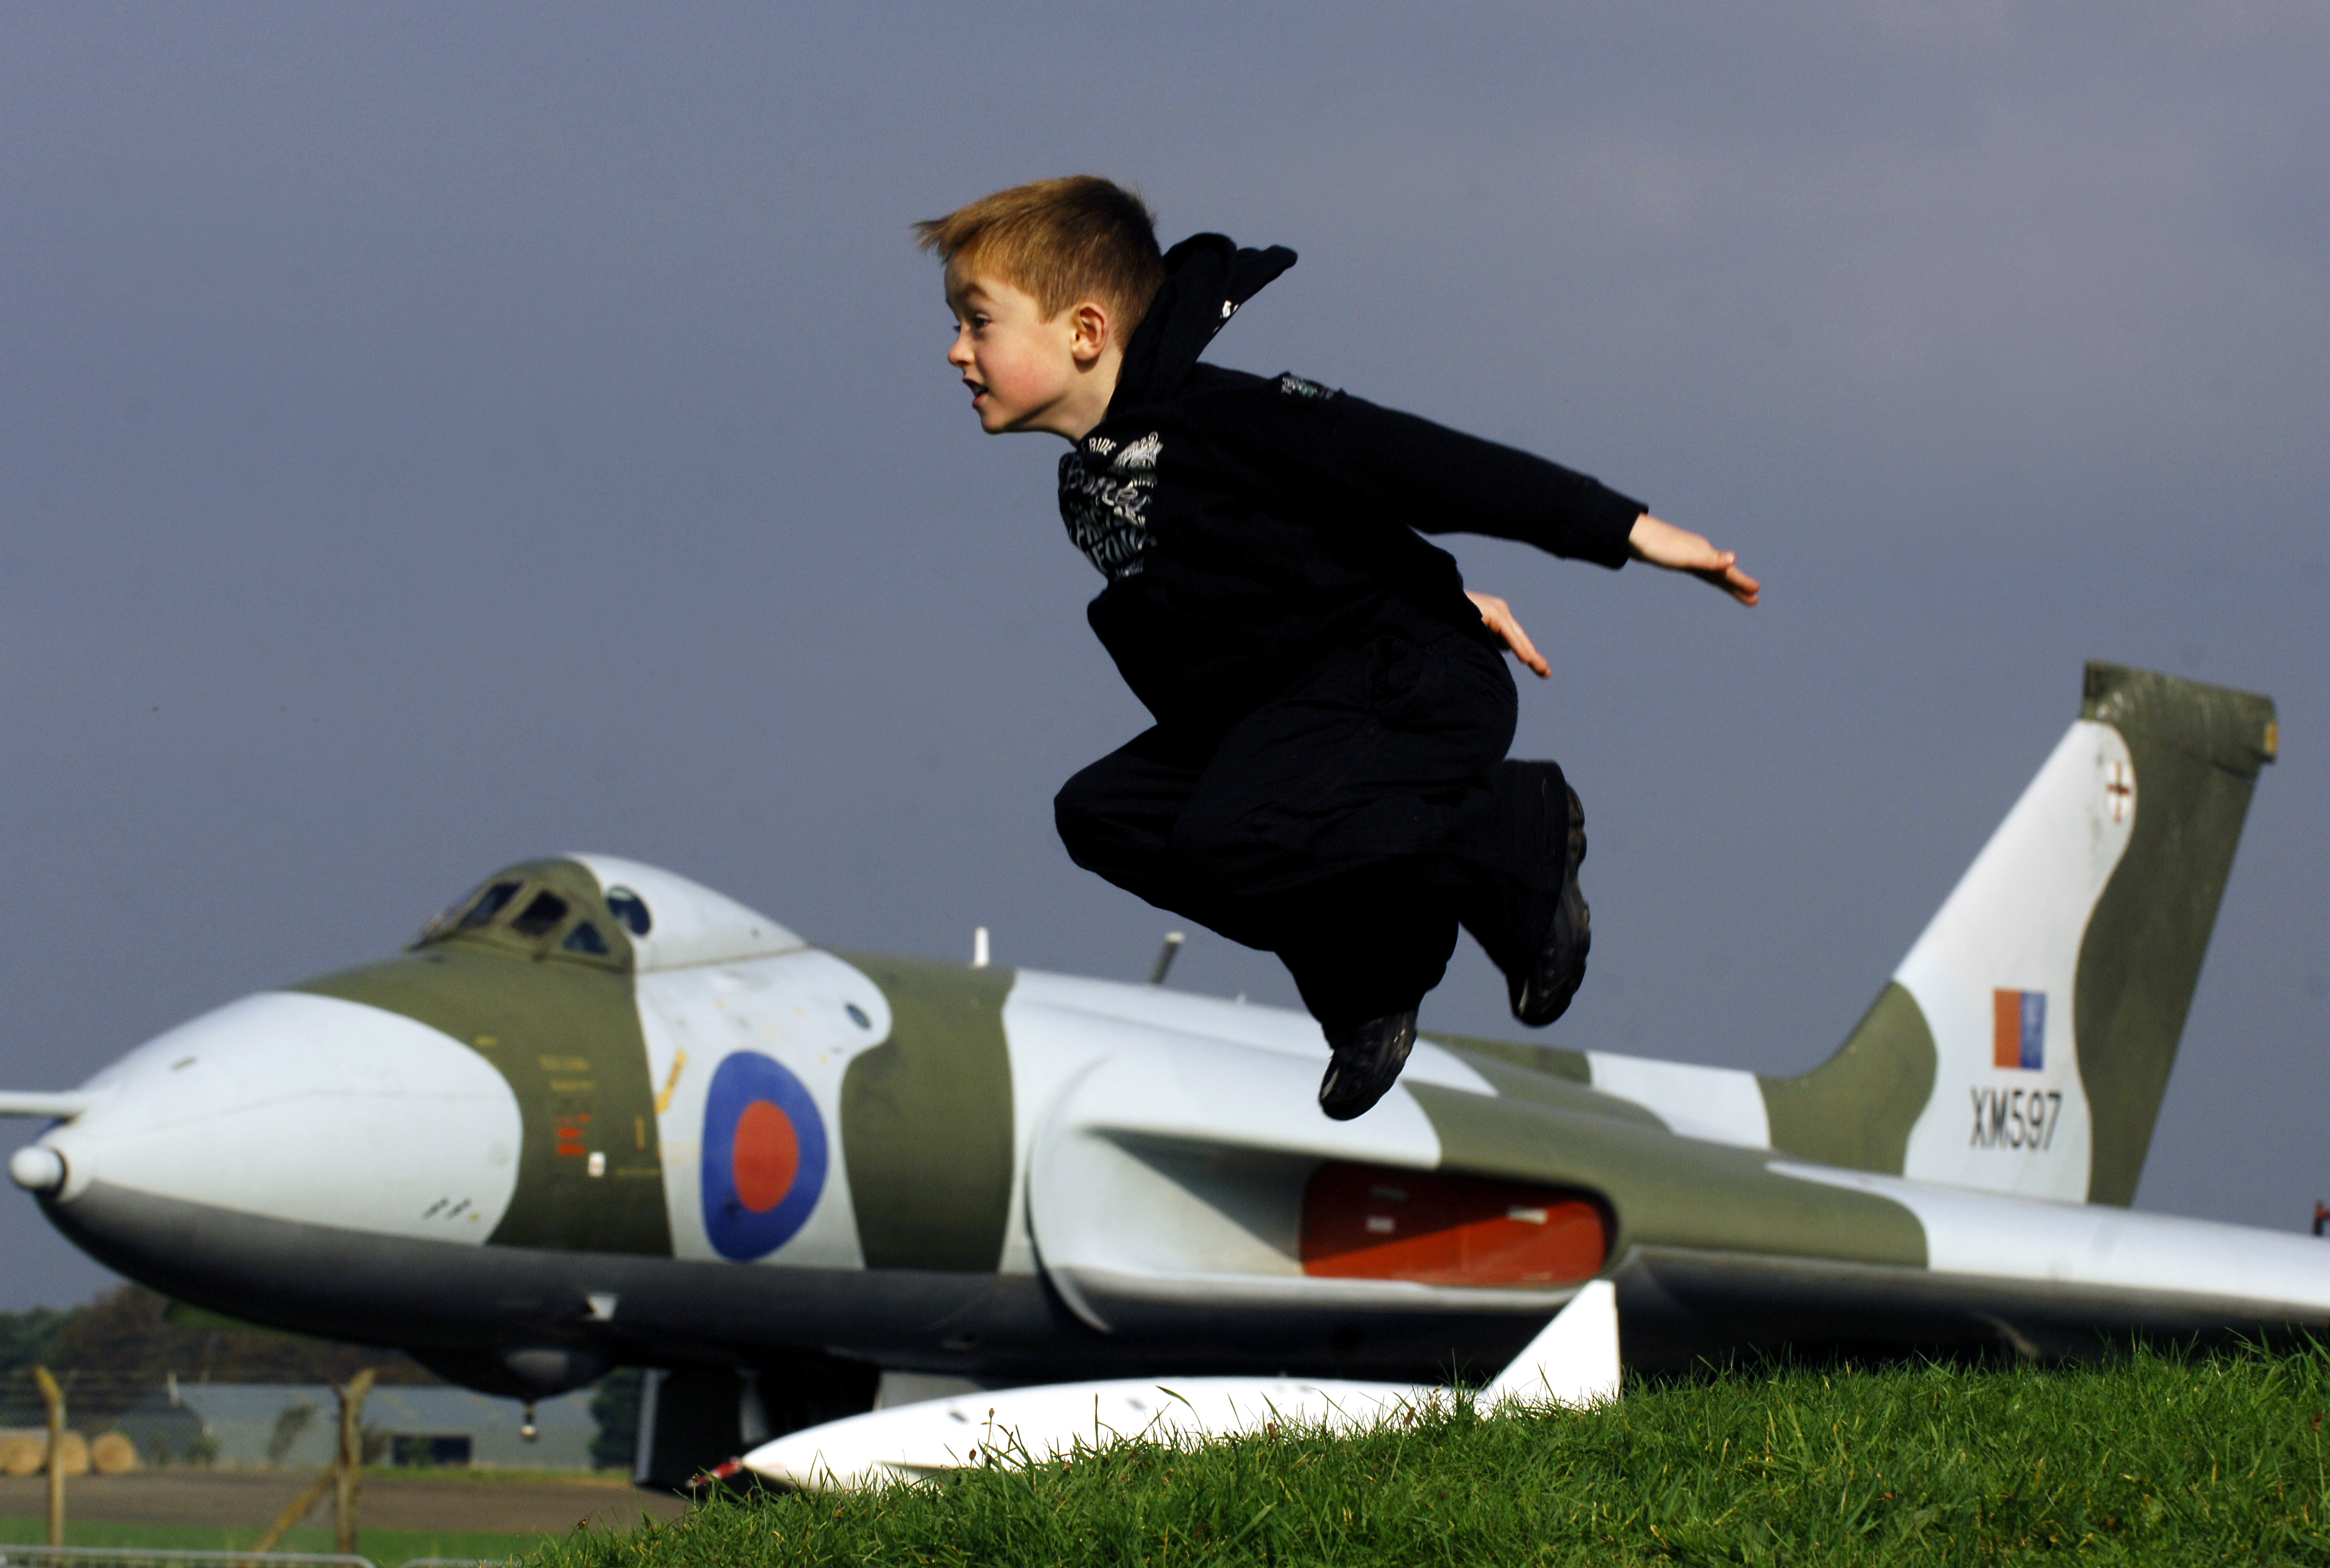 Boy taking flight from bunker in view of Avro Vulcan XM597 at National Museum of Flight, East Fortune Airfield.